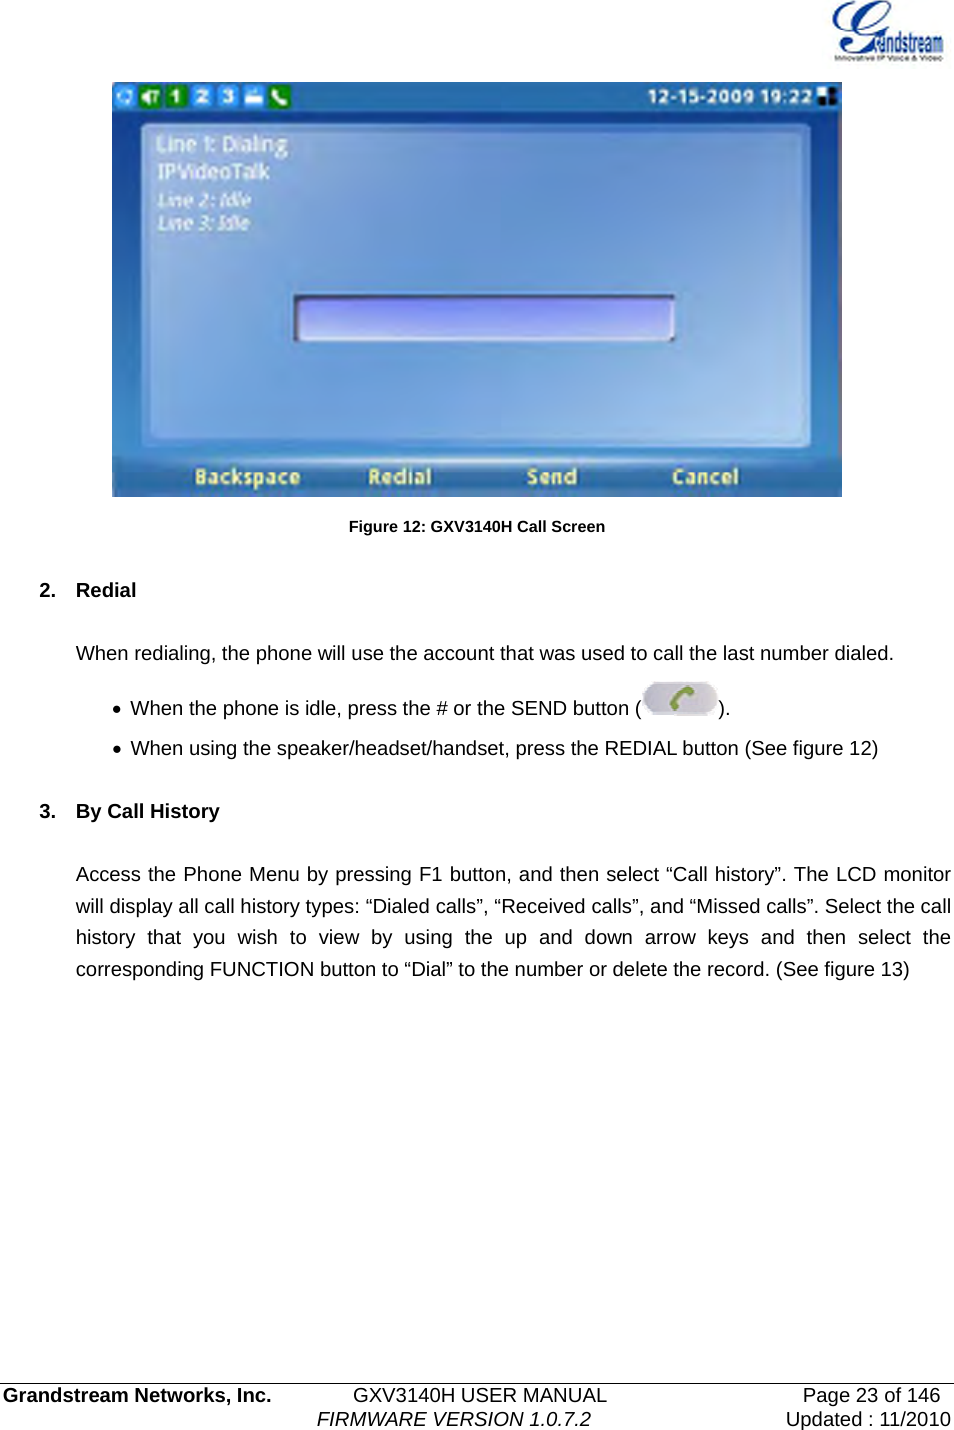   Grandstream Networks, Inc.        GXV3140H USER MANUAL                  Page 23 of 146                                FIRMWARE VERSION 1.0.7.2 Updated : 11/2010   Figure 12: GXV3140H Call Screen  2. Redial  When redialing, the phone will use the account that was used to call the last number dialed. •  When the phone is idle, press the # or the SEND button ( ). •  When using the speaker/headset/handset, press the REDIAL button (See figure 12)  3. By Call History  Access the Phone Menu by pressing F1 button, and then select “Call history”. The LCD monitor will display all call history types: “Dialed calls”, “Received calls”, and “Missed calls”. Select the call history that you wish to view by using the up and down arrow keys and then select the corresponding FUNCTION button to “Dial” to the number or delete the record. (See figure 13) 